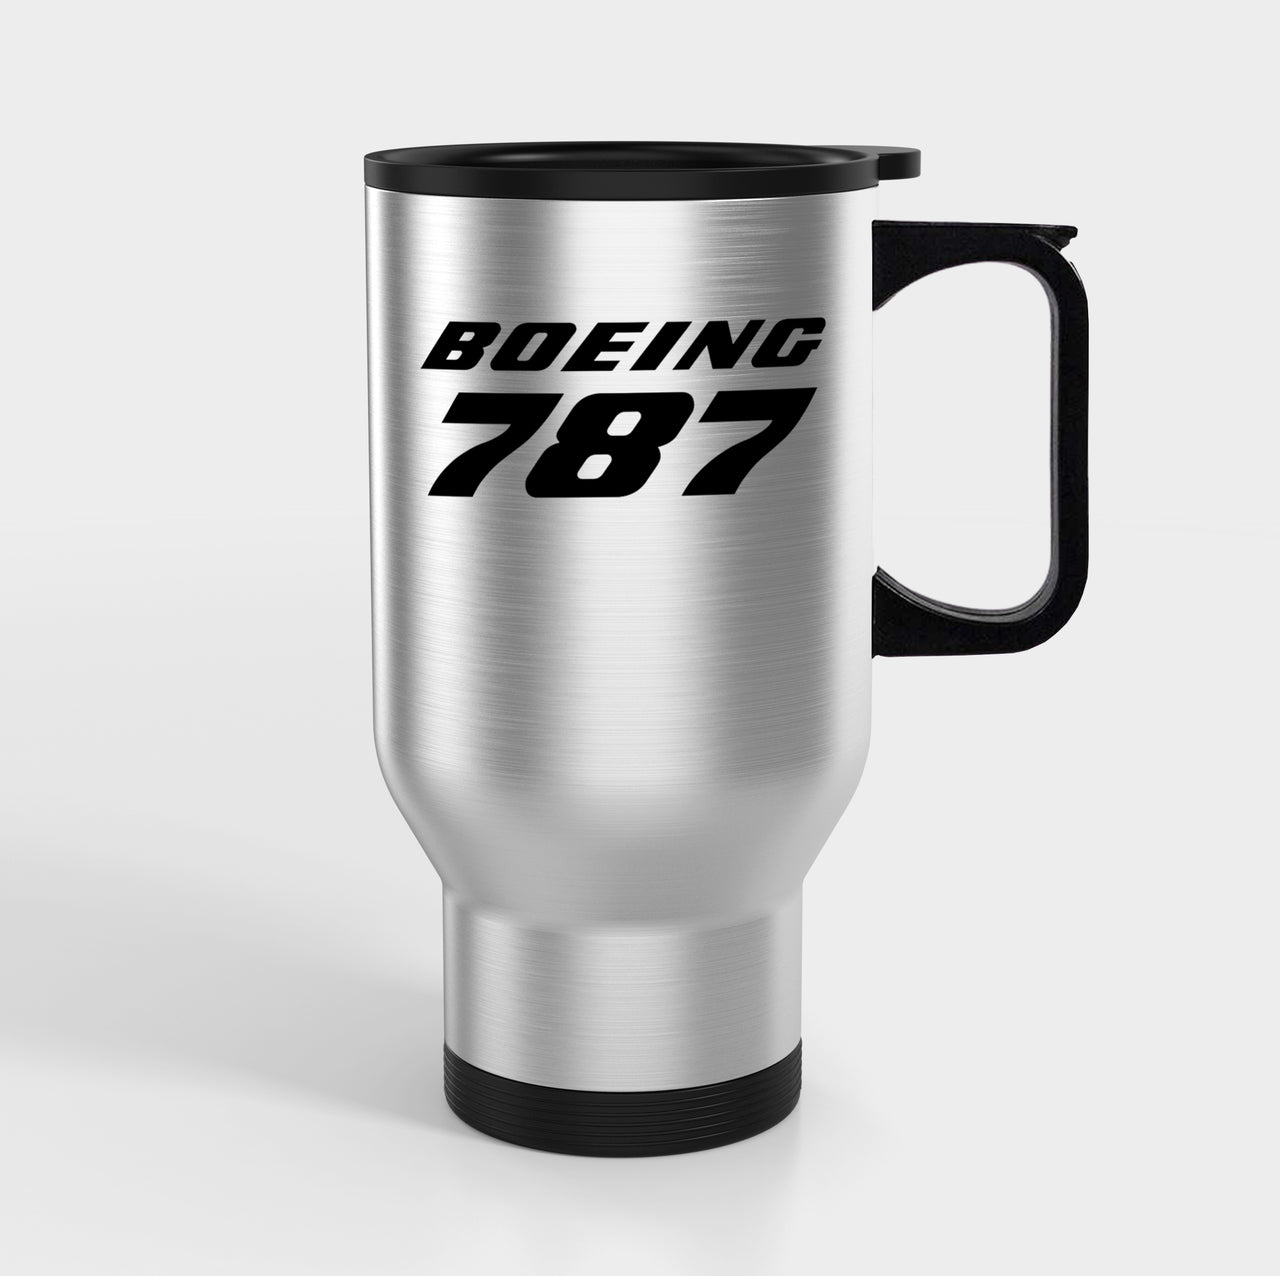 Boeing 787 & Text Designed Travel Mugs (With Holder)